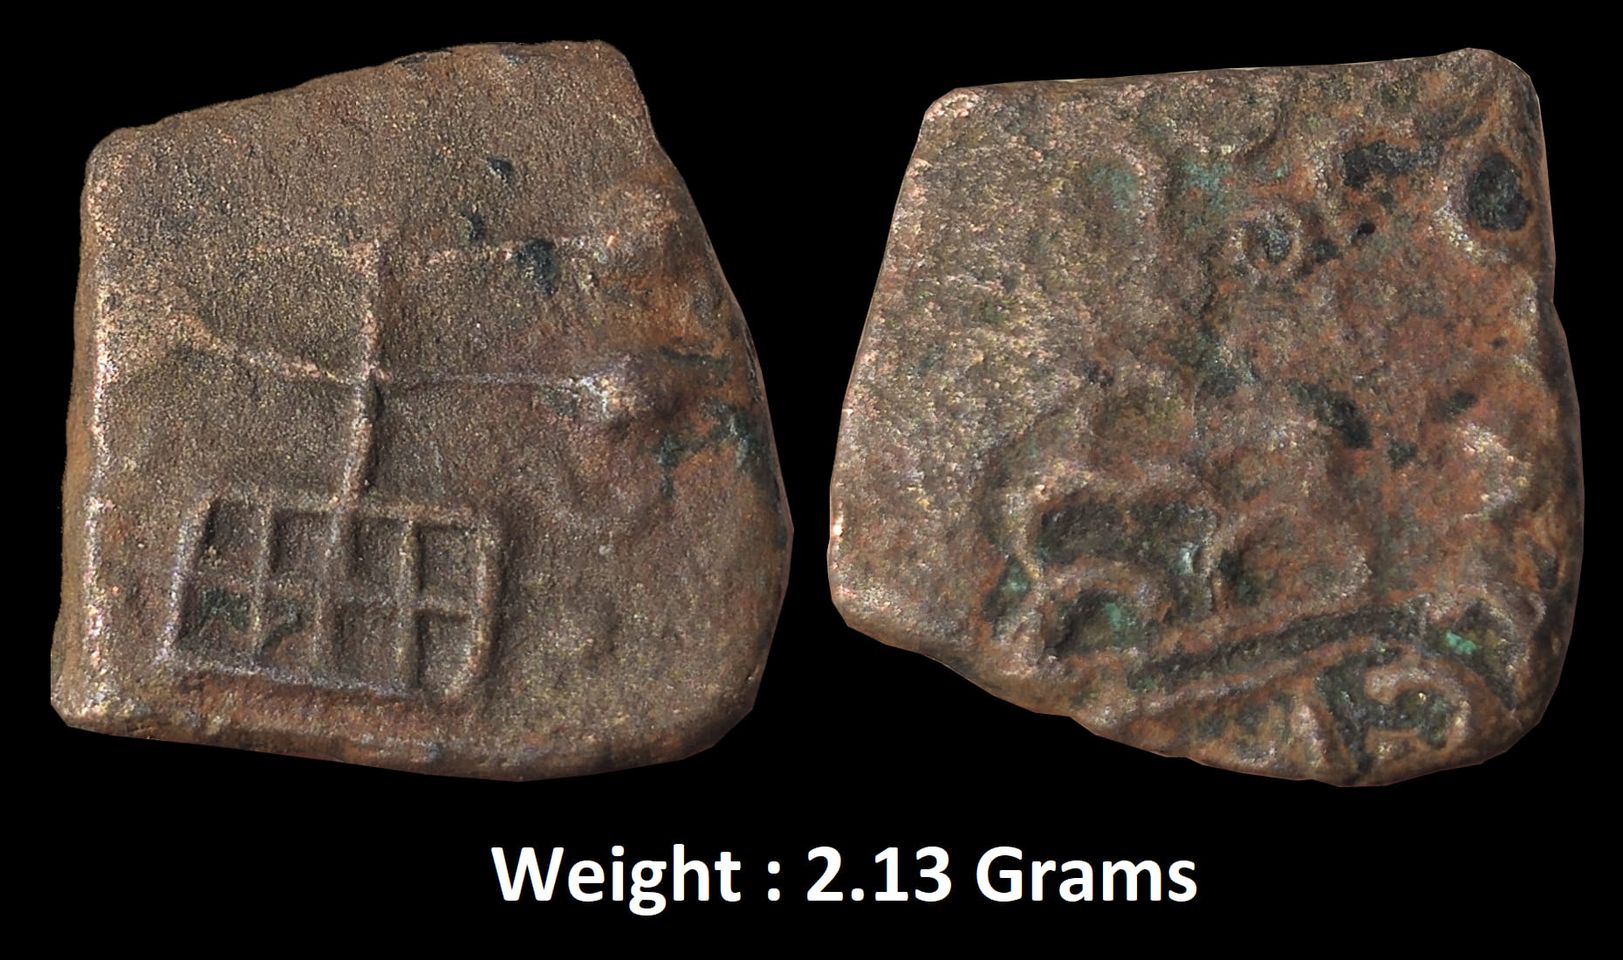 Ancient ; Central India Coinage ;
Obverse : Tree in railing .
Reverse : 5 Arch Hill with Nandipada symbol.